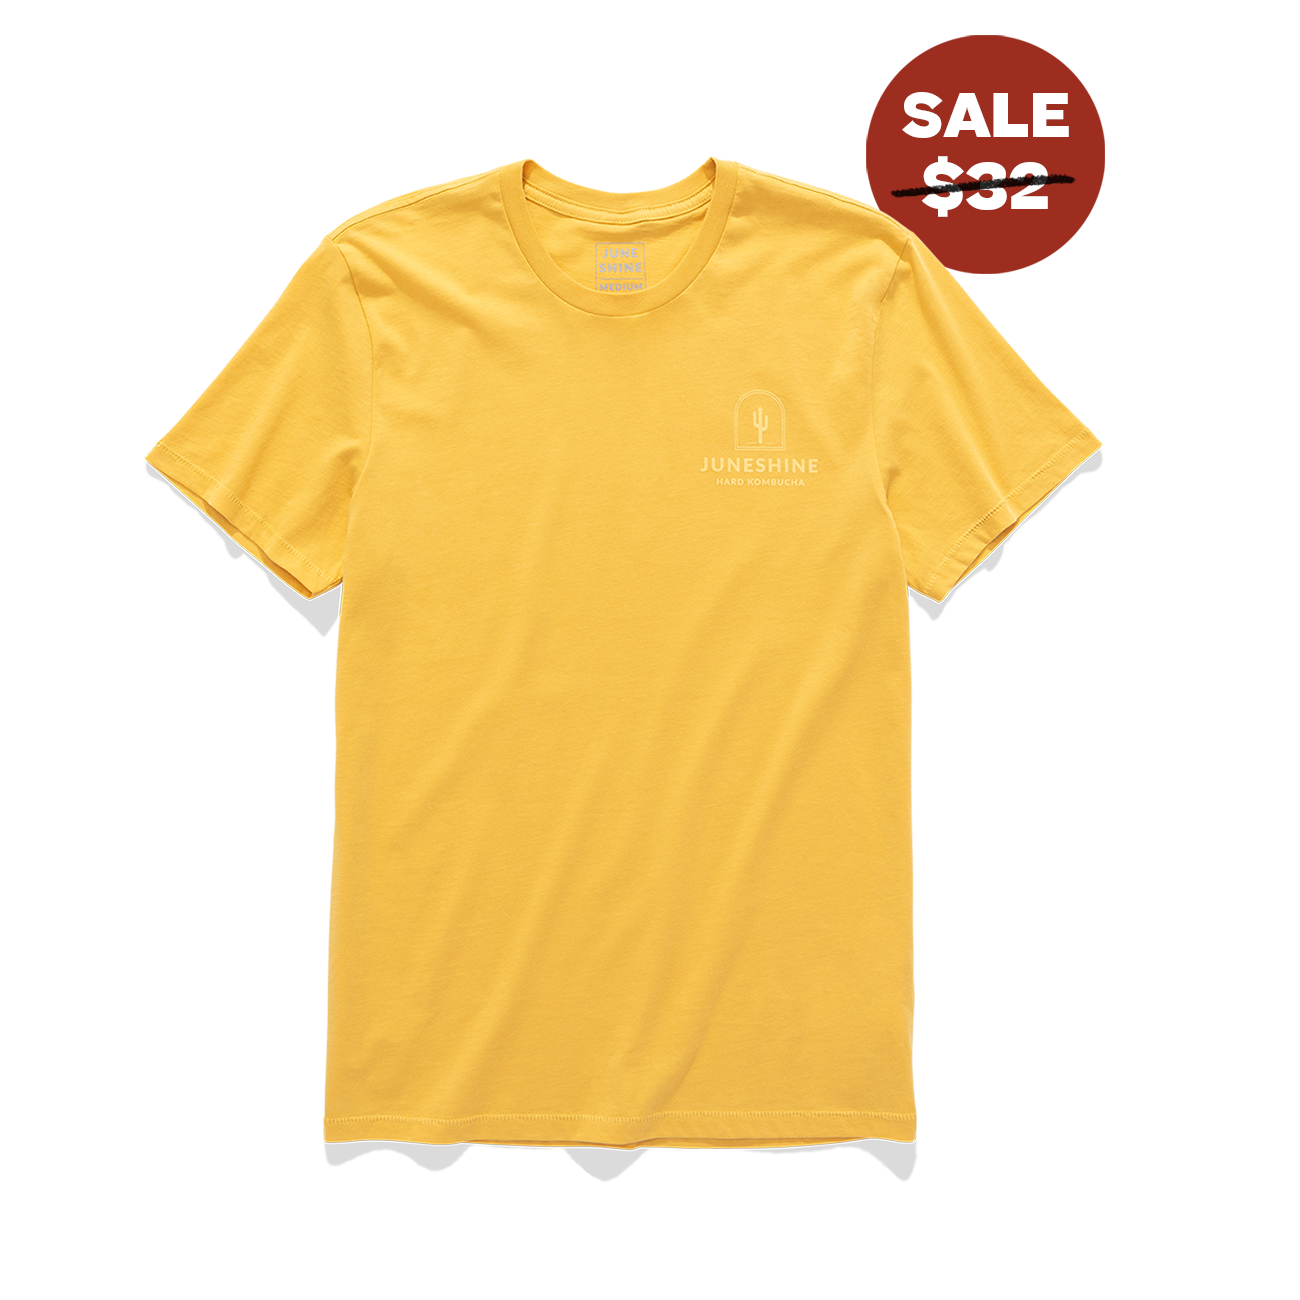 Front view of yellow tee shirt with graphic on the top left of a catus and test that reads "June shine hard kombucha"